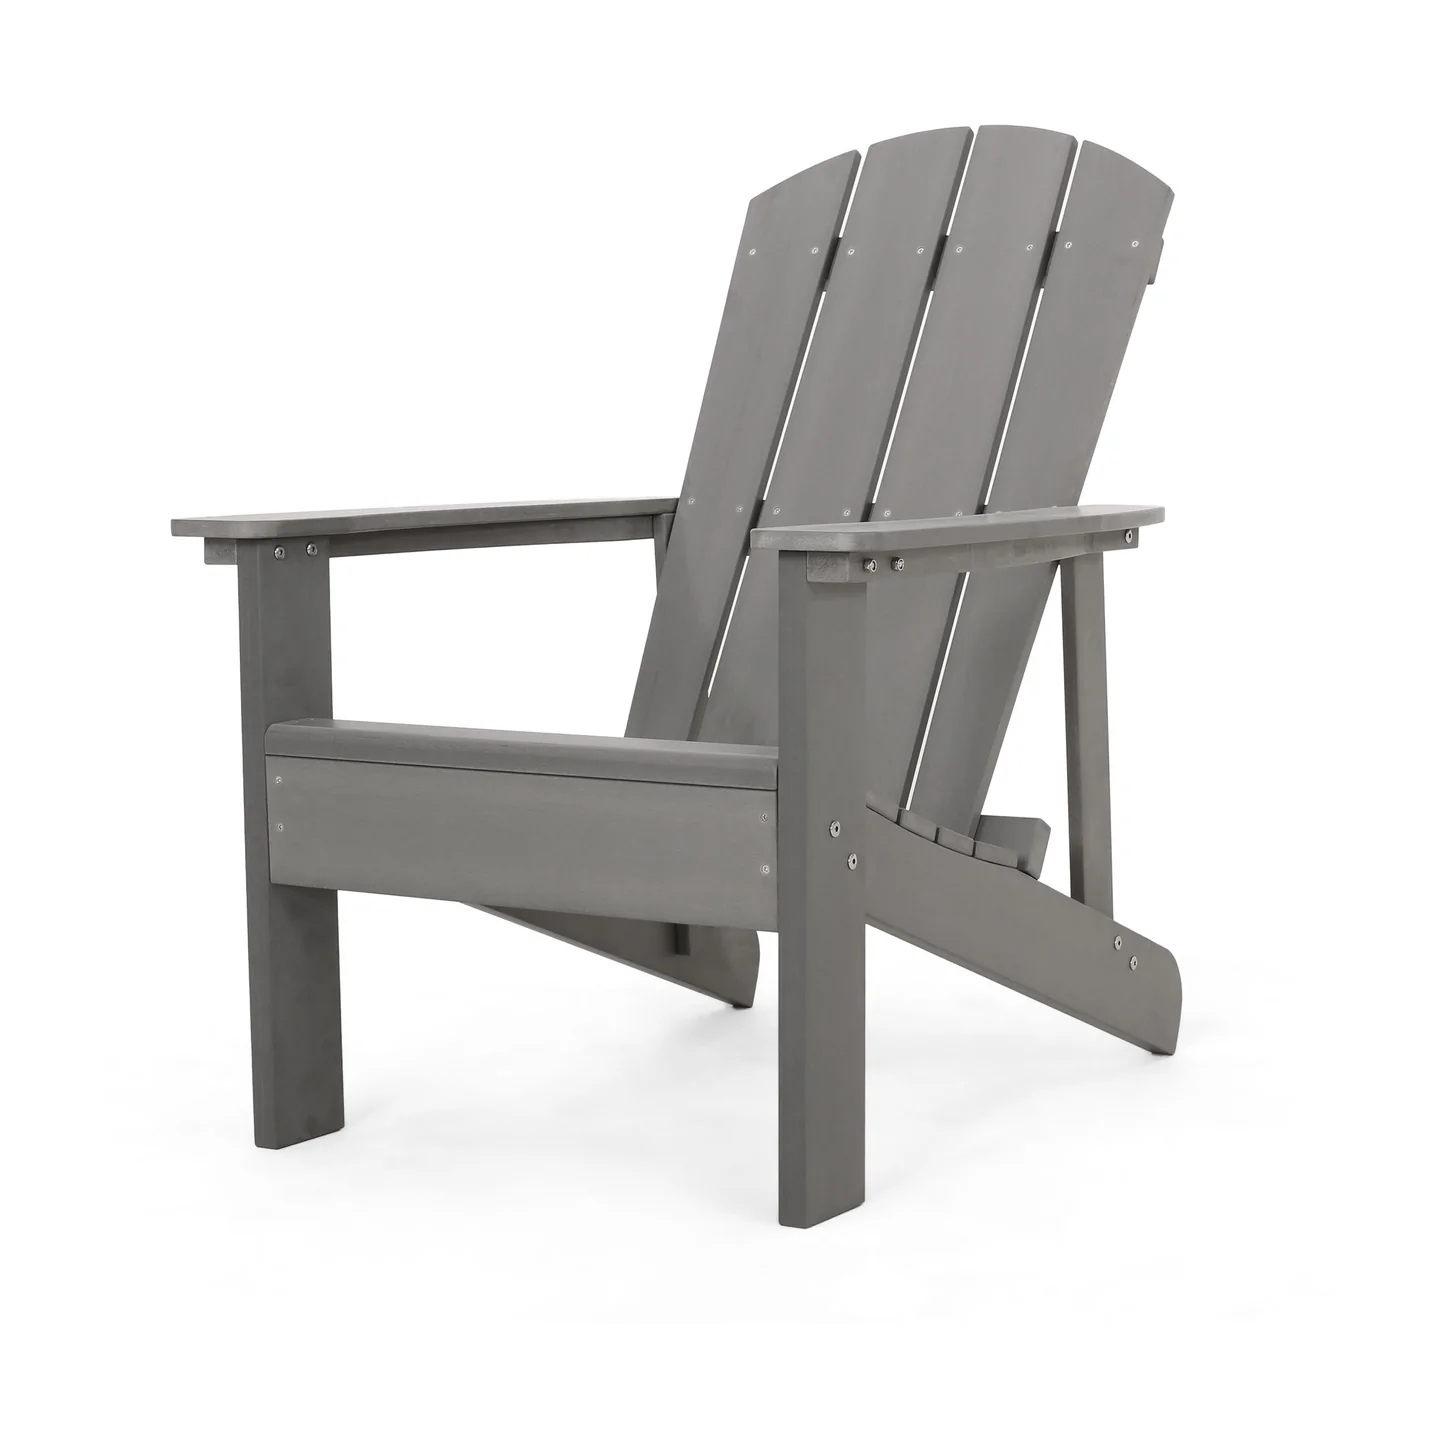 KUIKUI Classic Solid Gray Outdoor Solid Wood Adirondack Chair Garden Lounge Chair - image 3 of 8